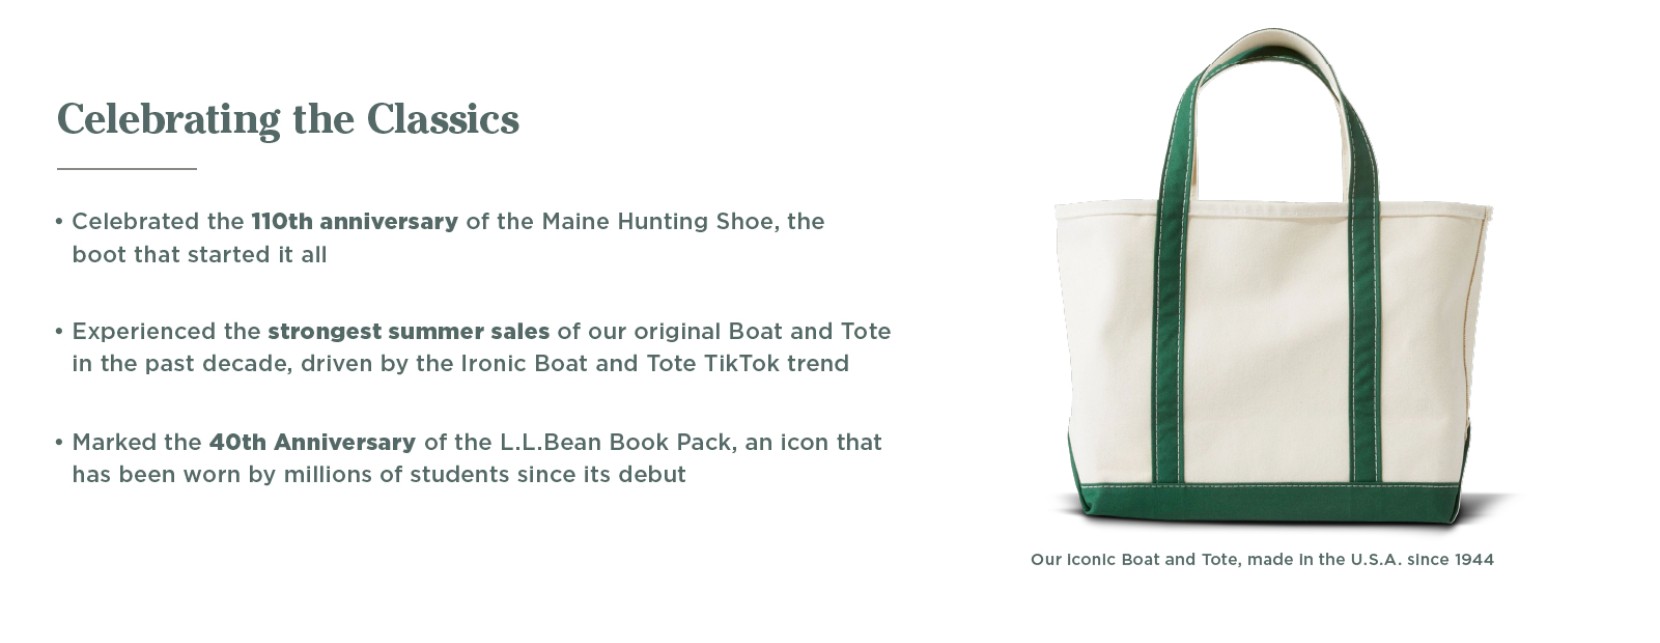 How L.L. Bean's Boat and Tote Bag Has Become the Latest Shopping Trend